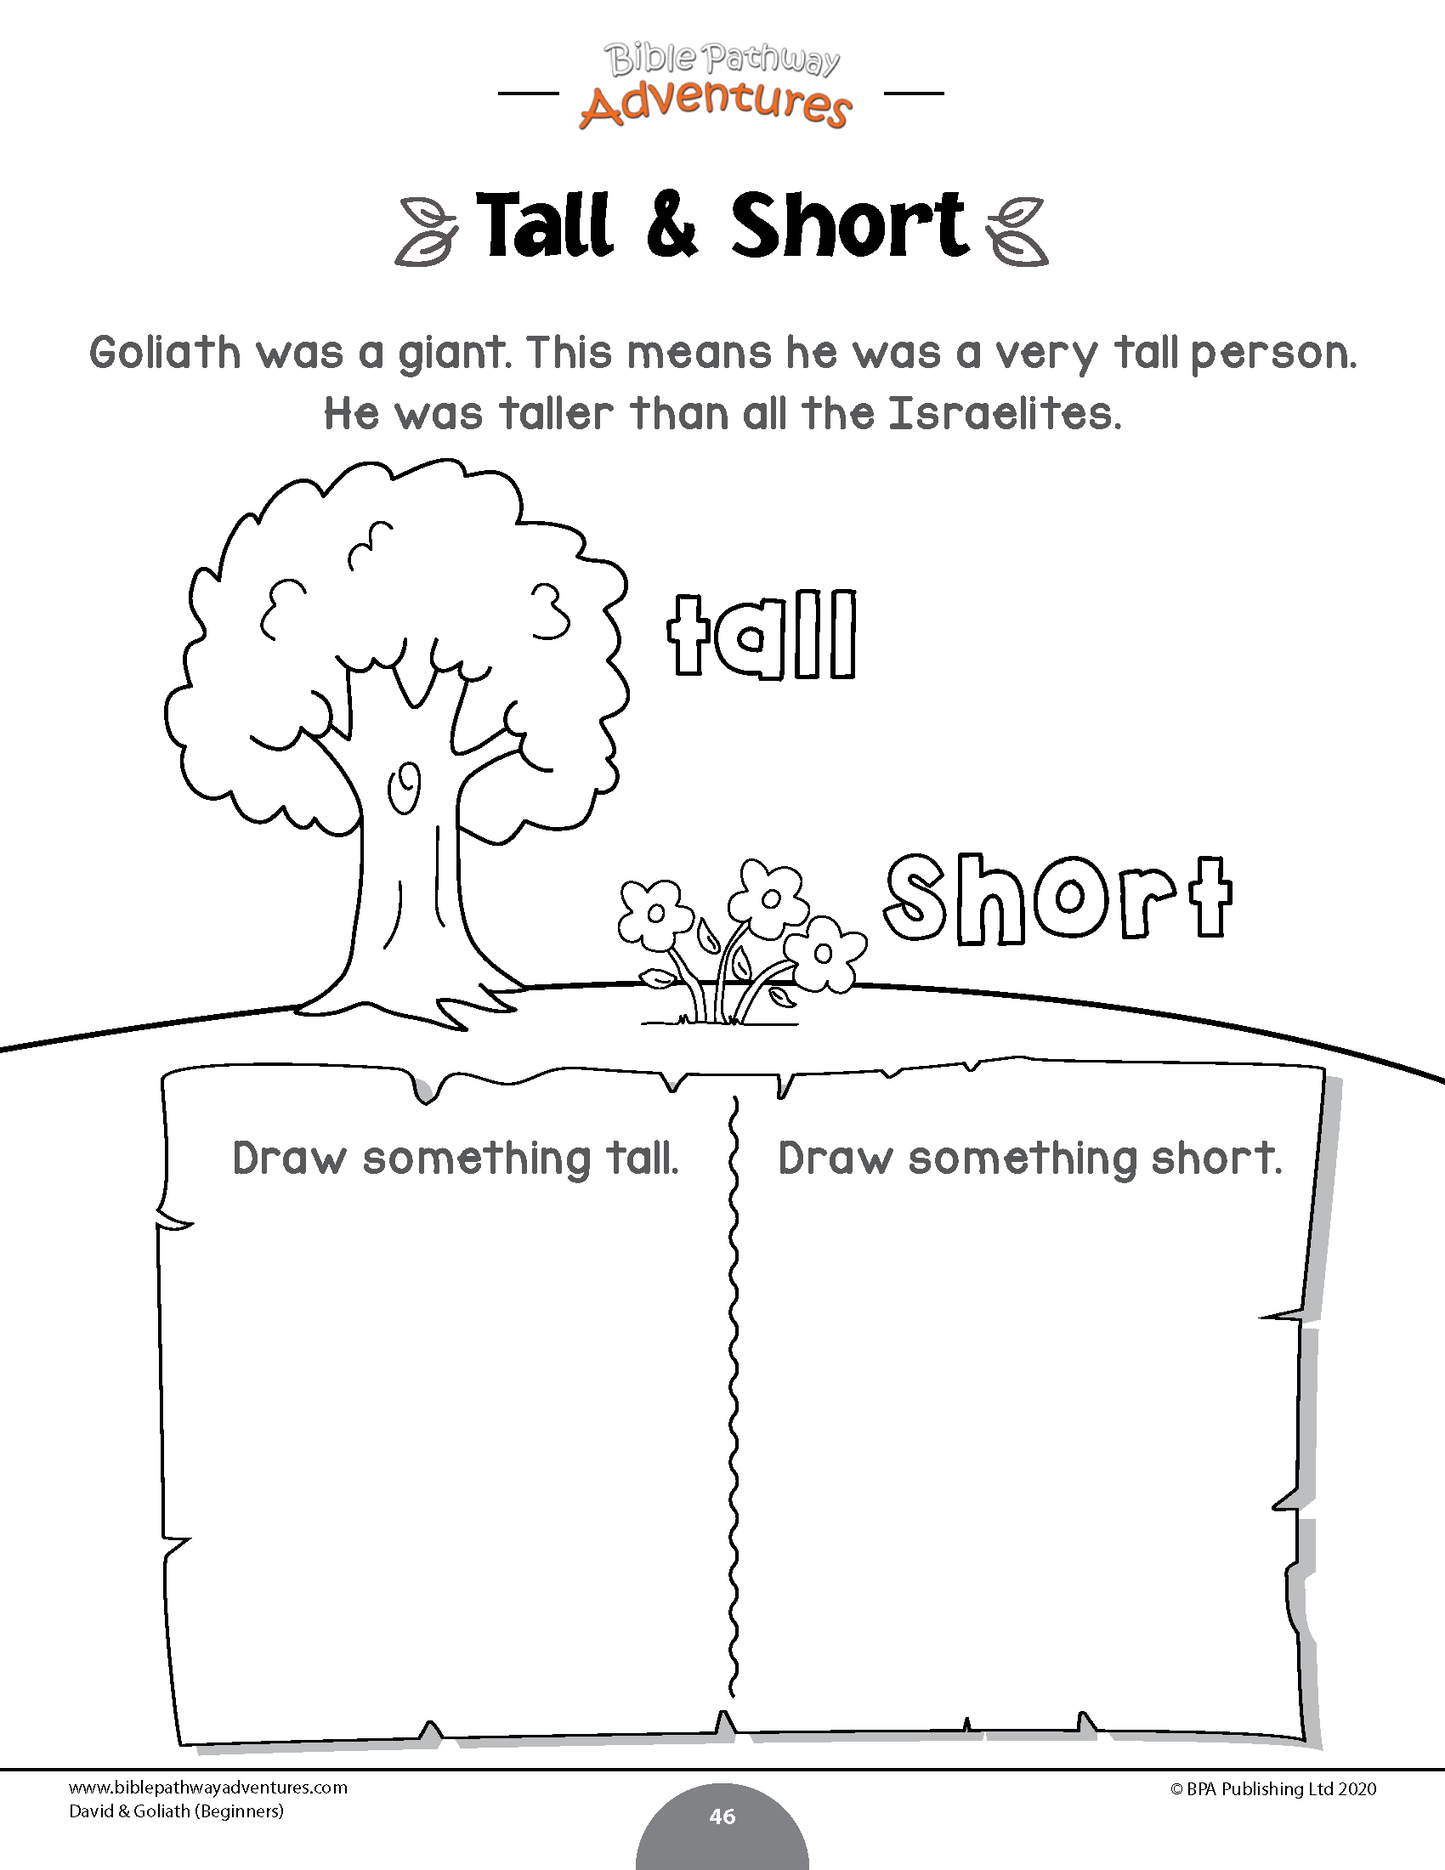 David and Goliath Activity Book for Beginners (PDF)